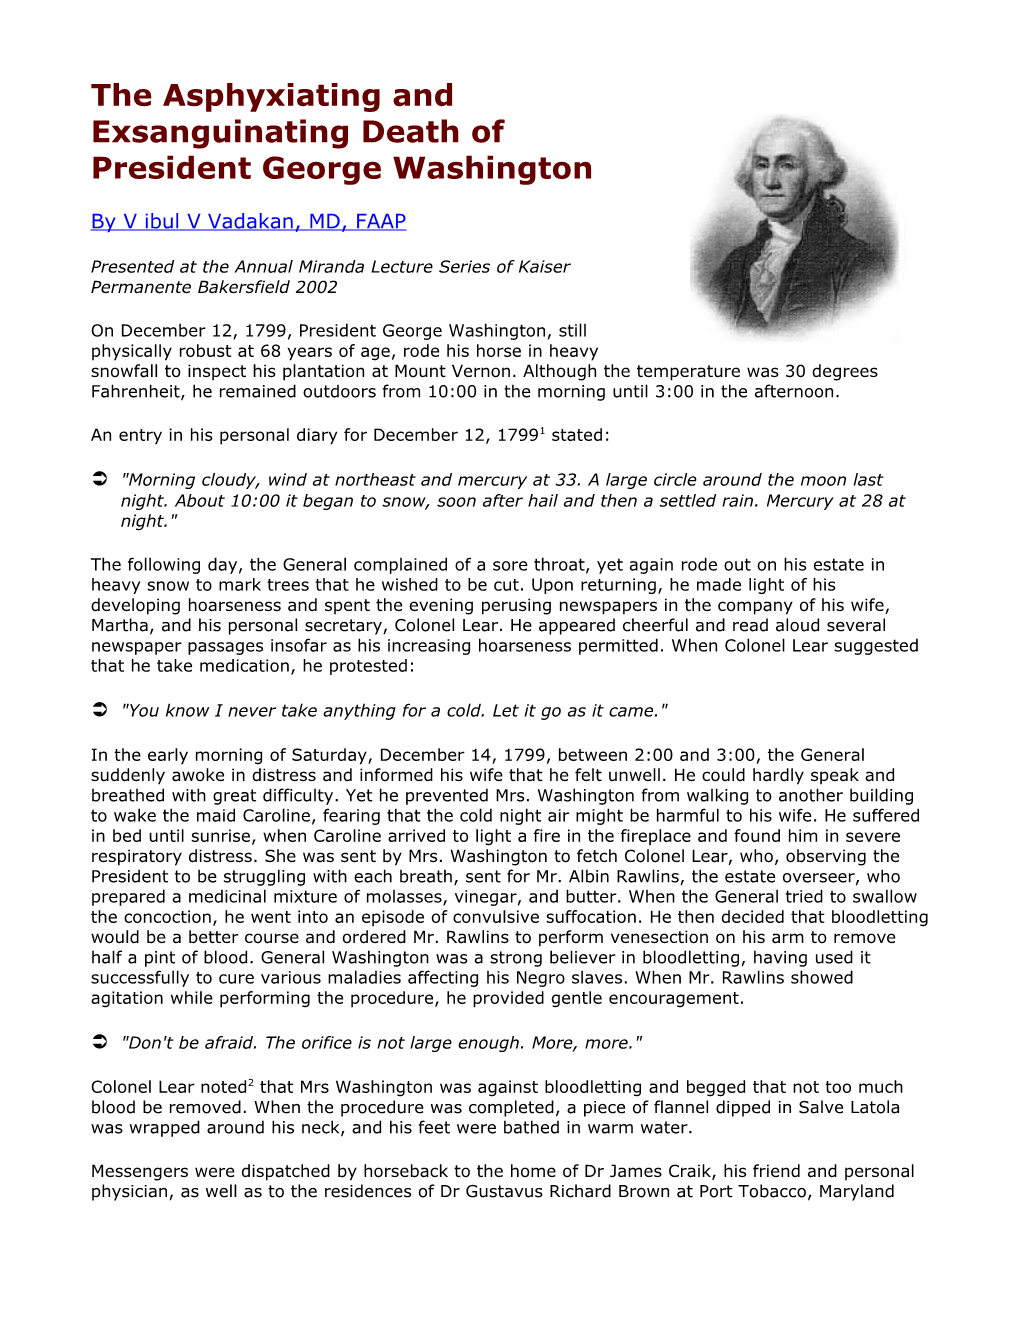 The Asphyxiating and Exsanguinating Death of President George Washington